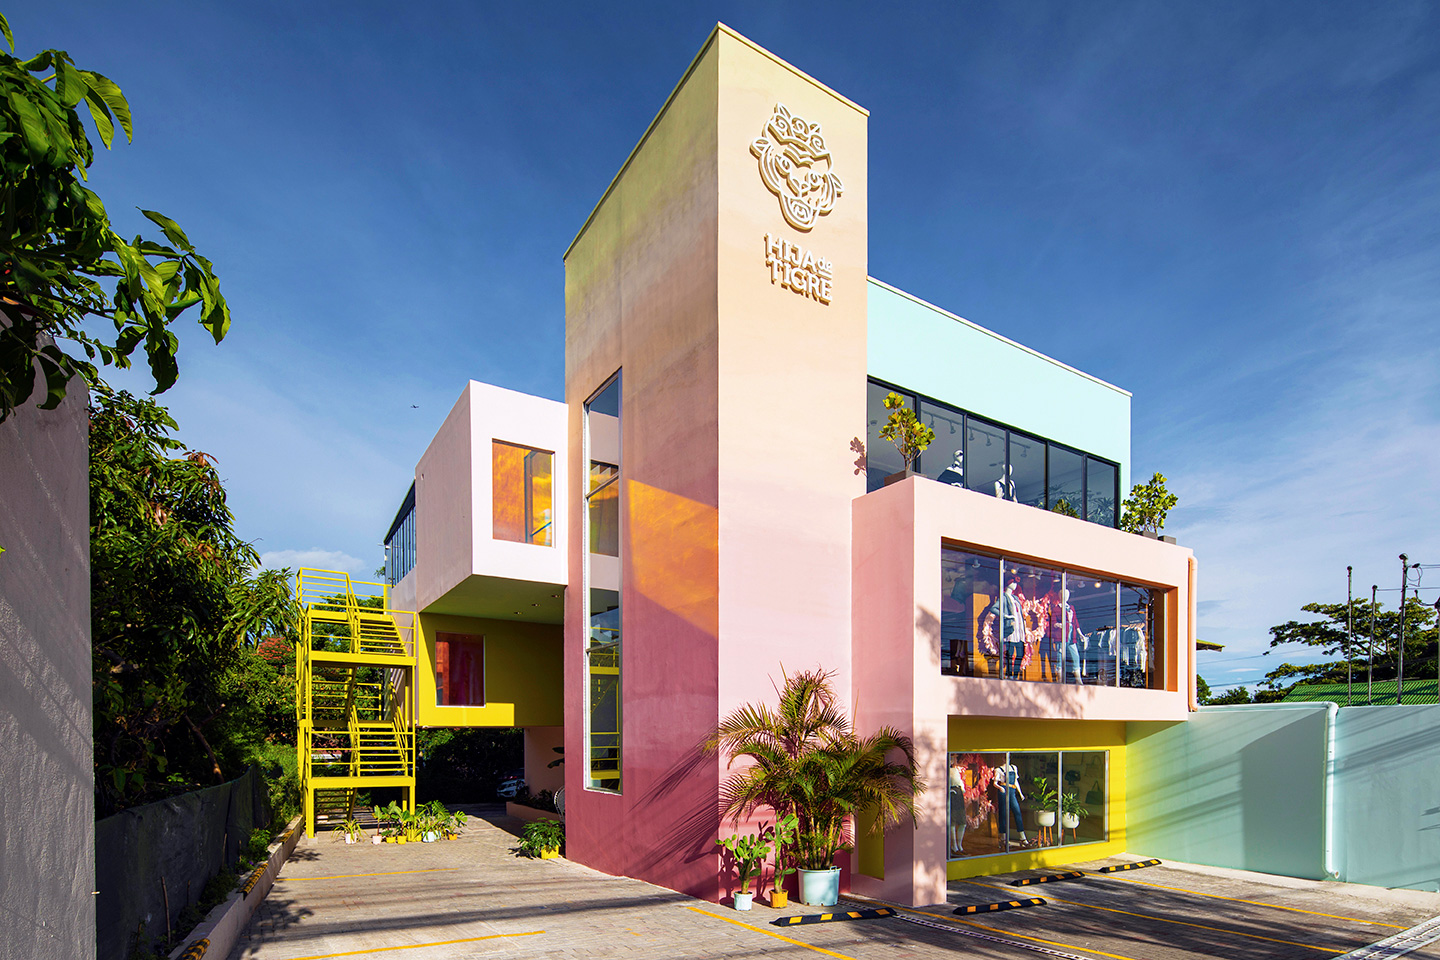 An ombre pink-to-orange building with the words Hija de Tigre on it